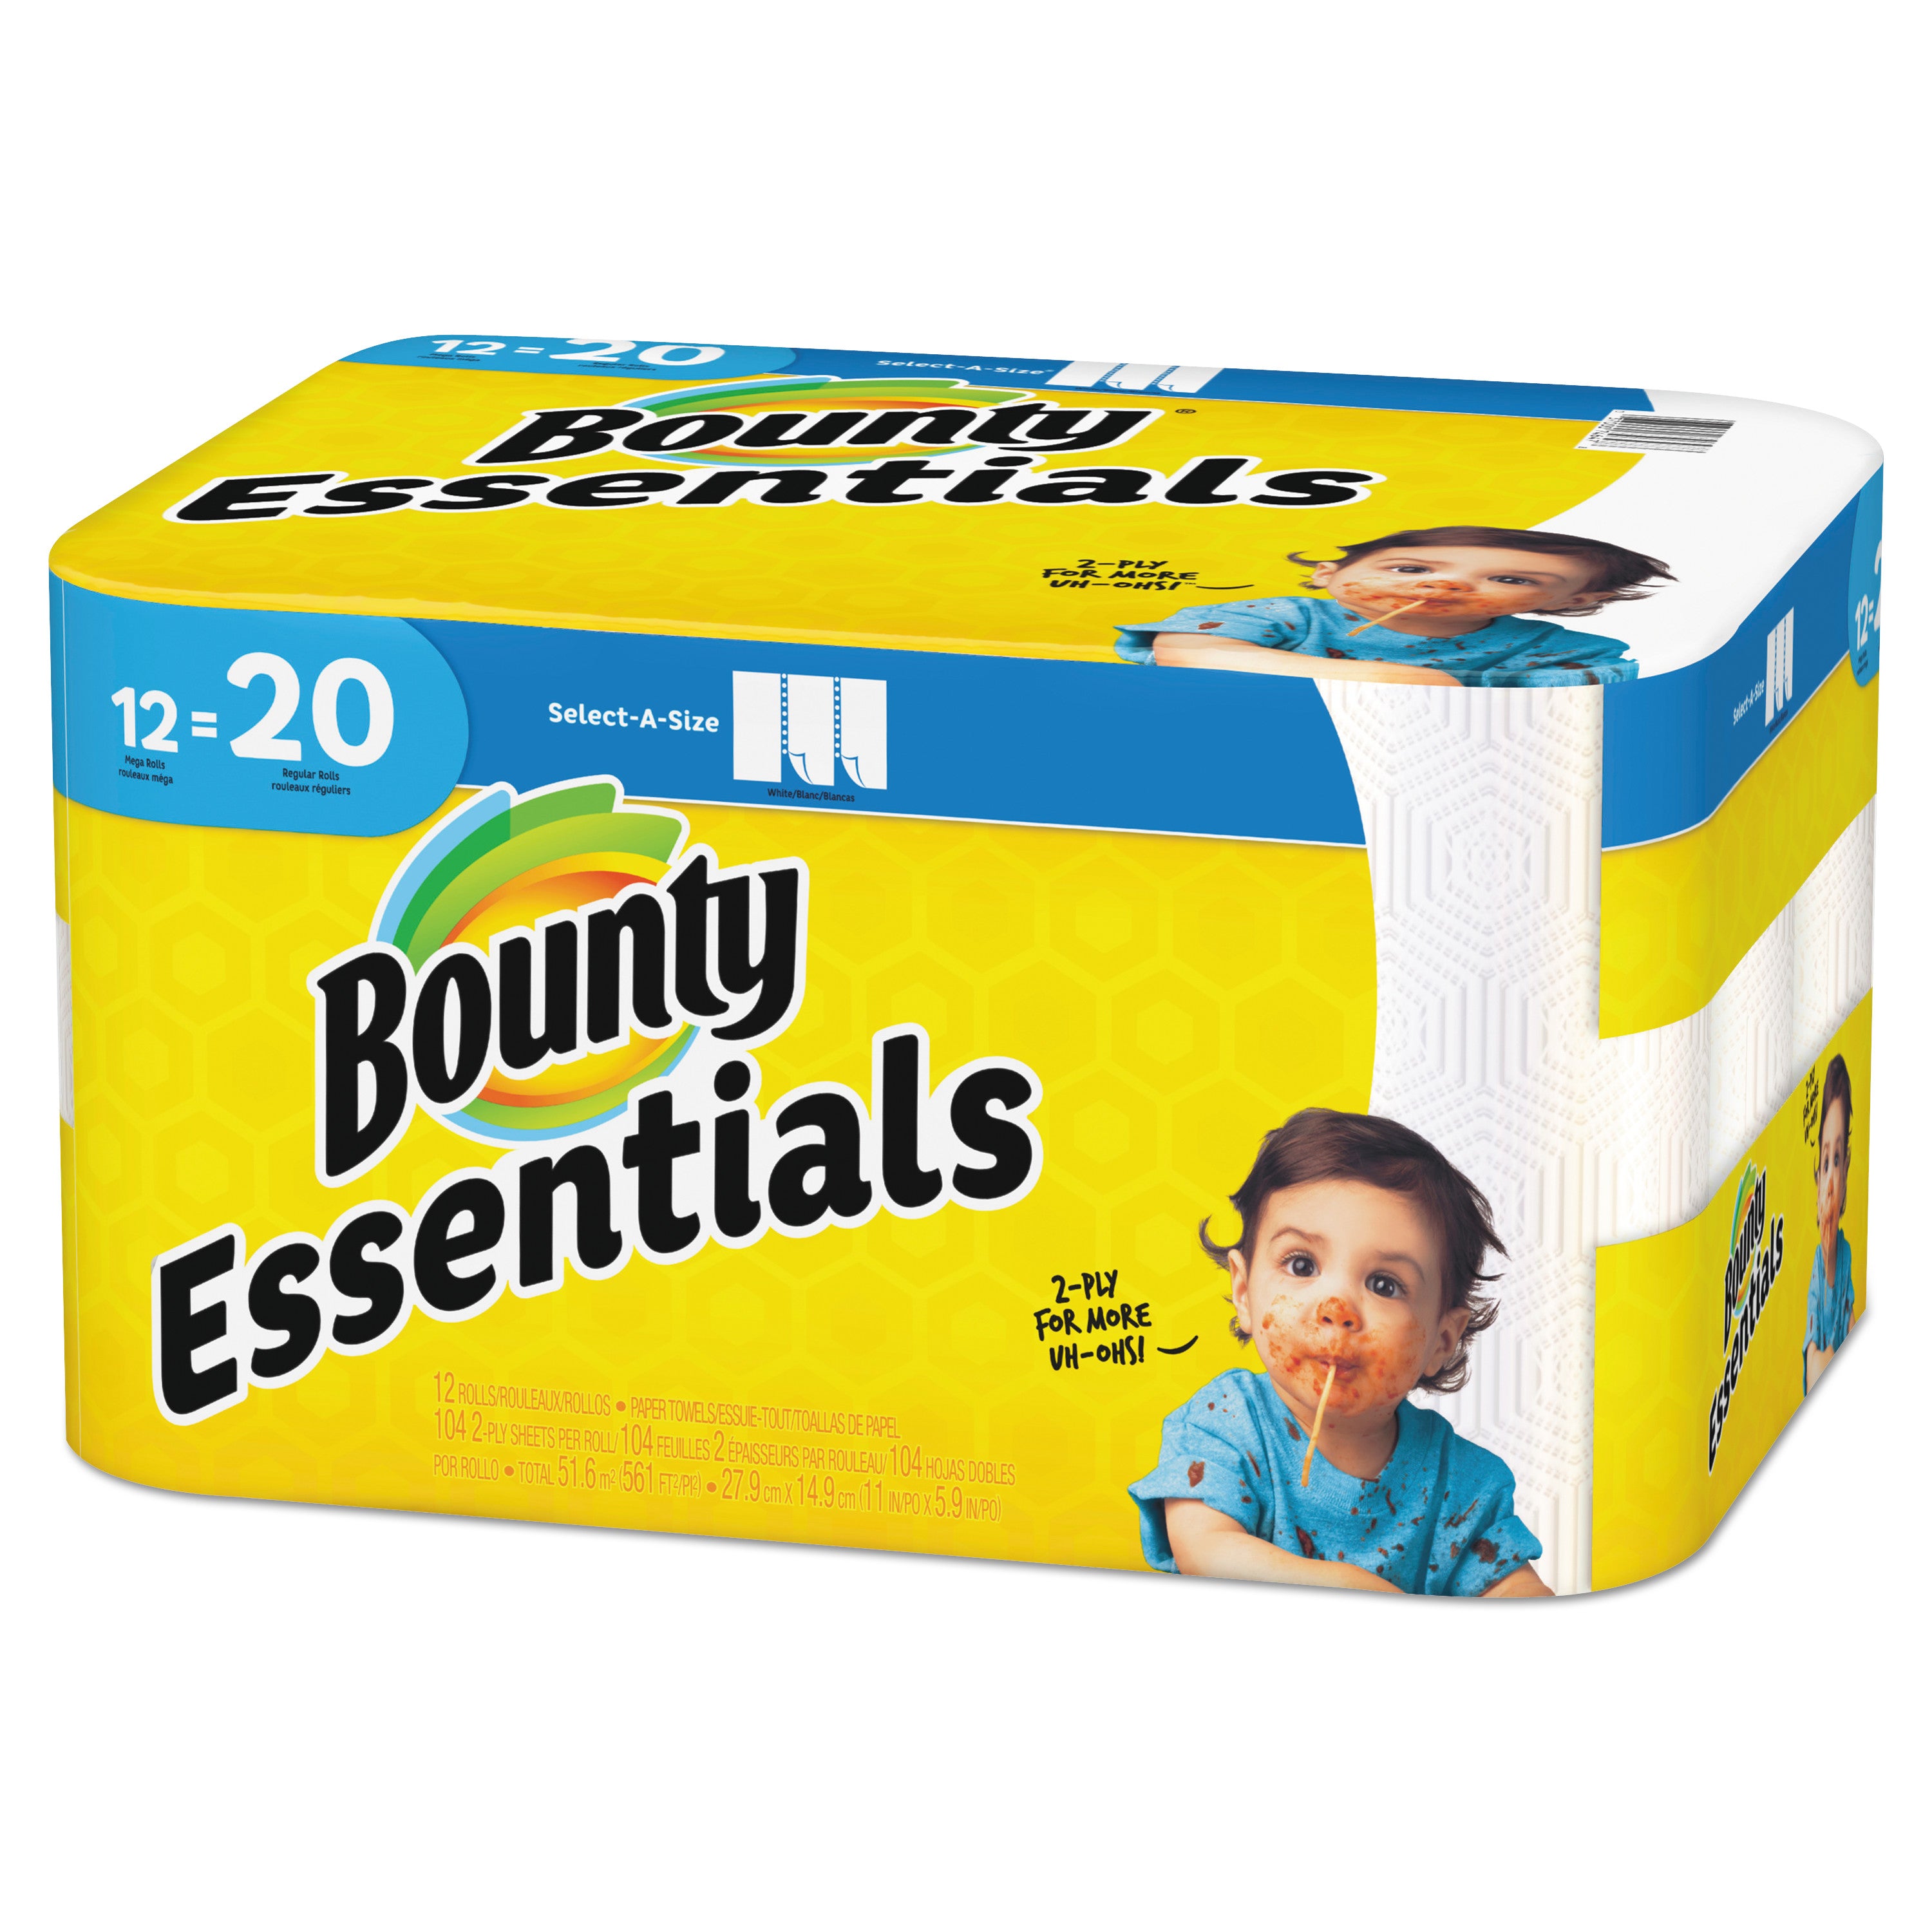 essentials-select-a-size-kitchen-roll-paper-towels-2-ply-104-sheets-roll-12-rolls-carton_pgc74647 - 1